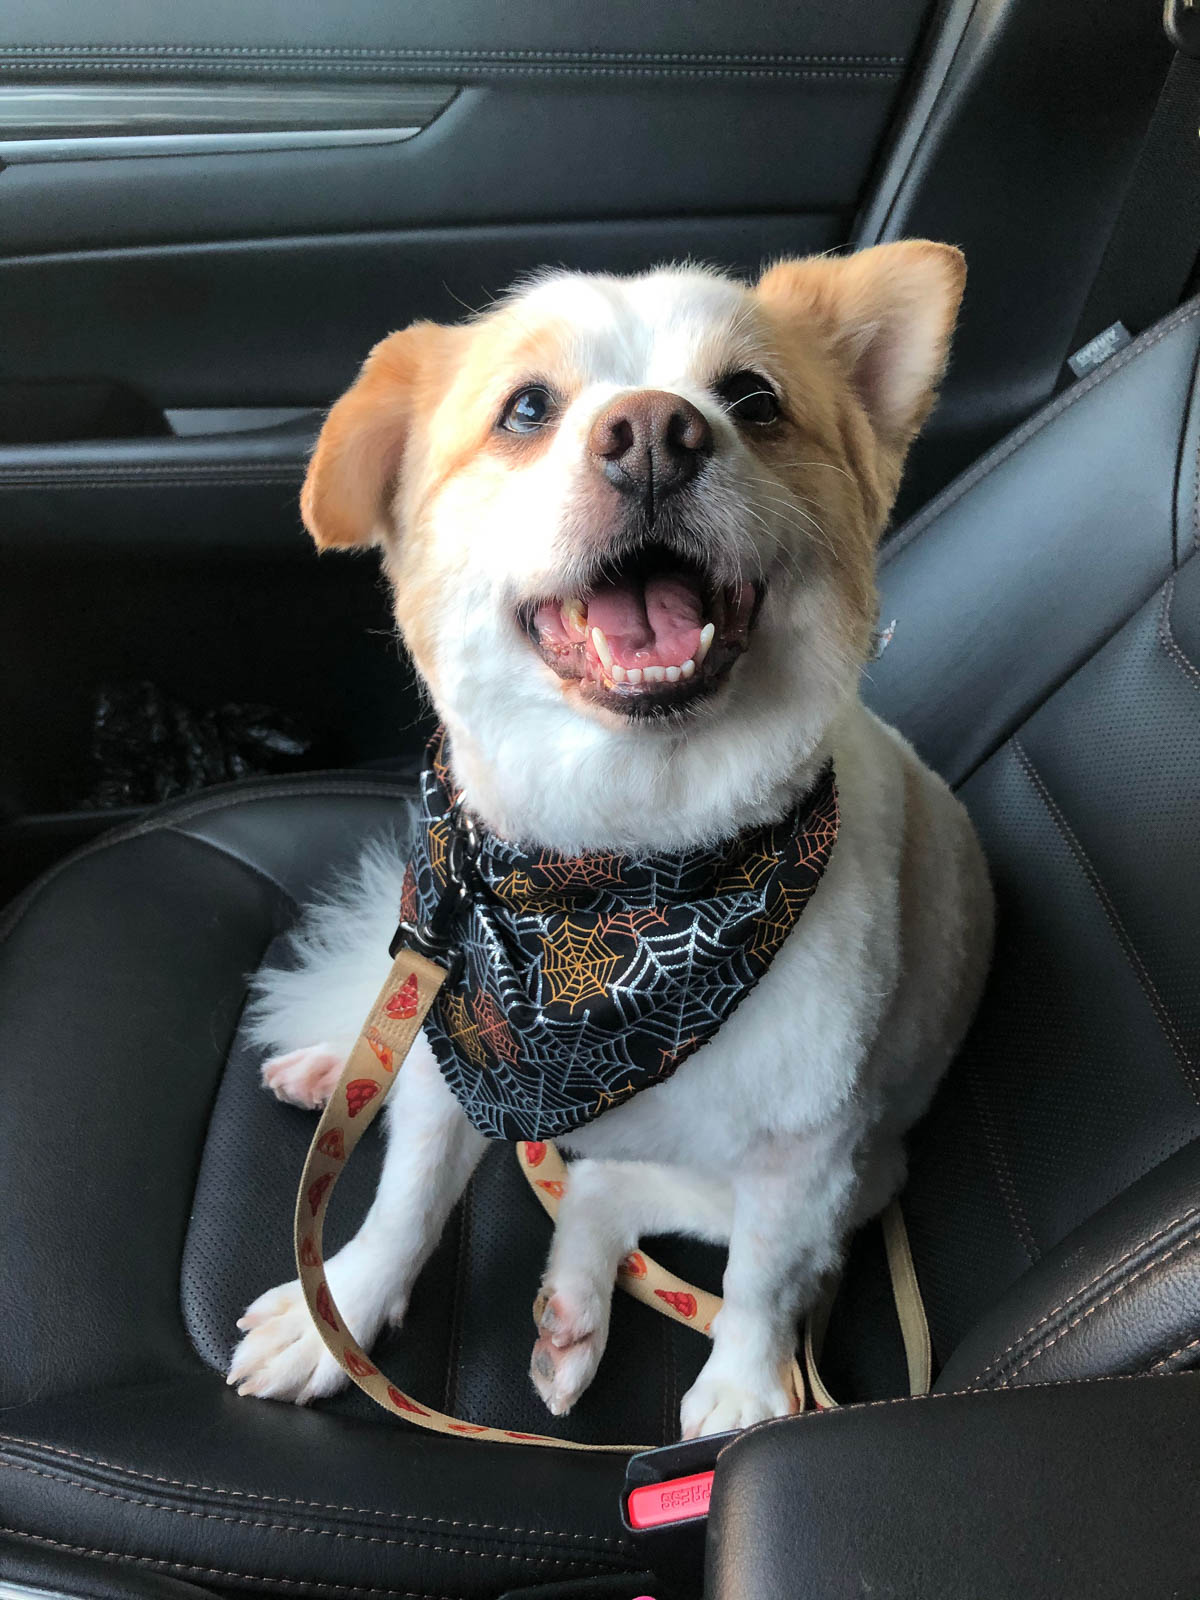 Betty, our sassy little brown and white mutt sitting in the front seat of my car with a new haircut. 